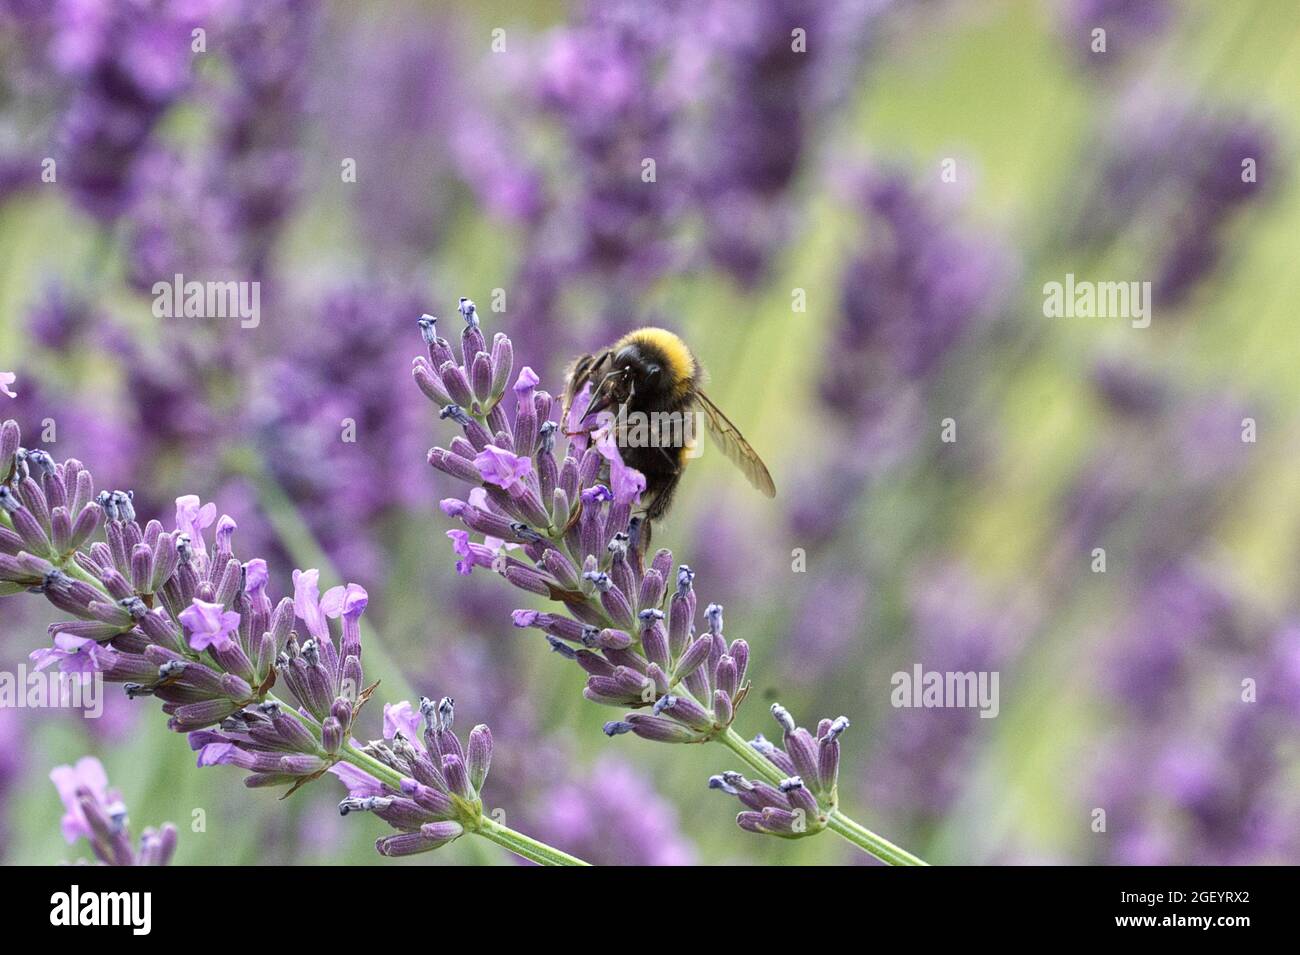 White Tailed Bumble bees collecting pollen from the flower heads of lavender plants. Stock Photo